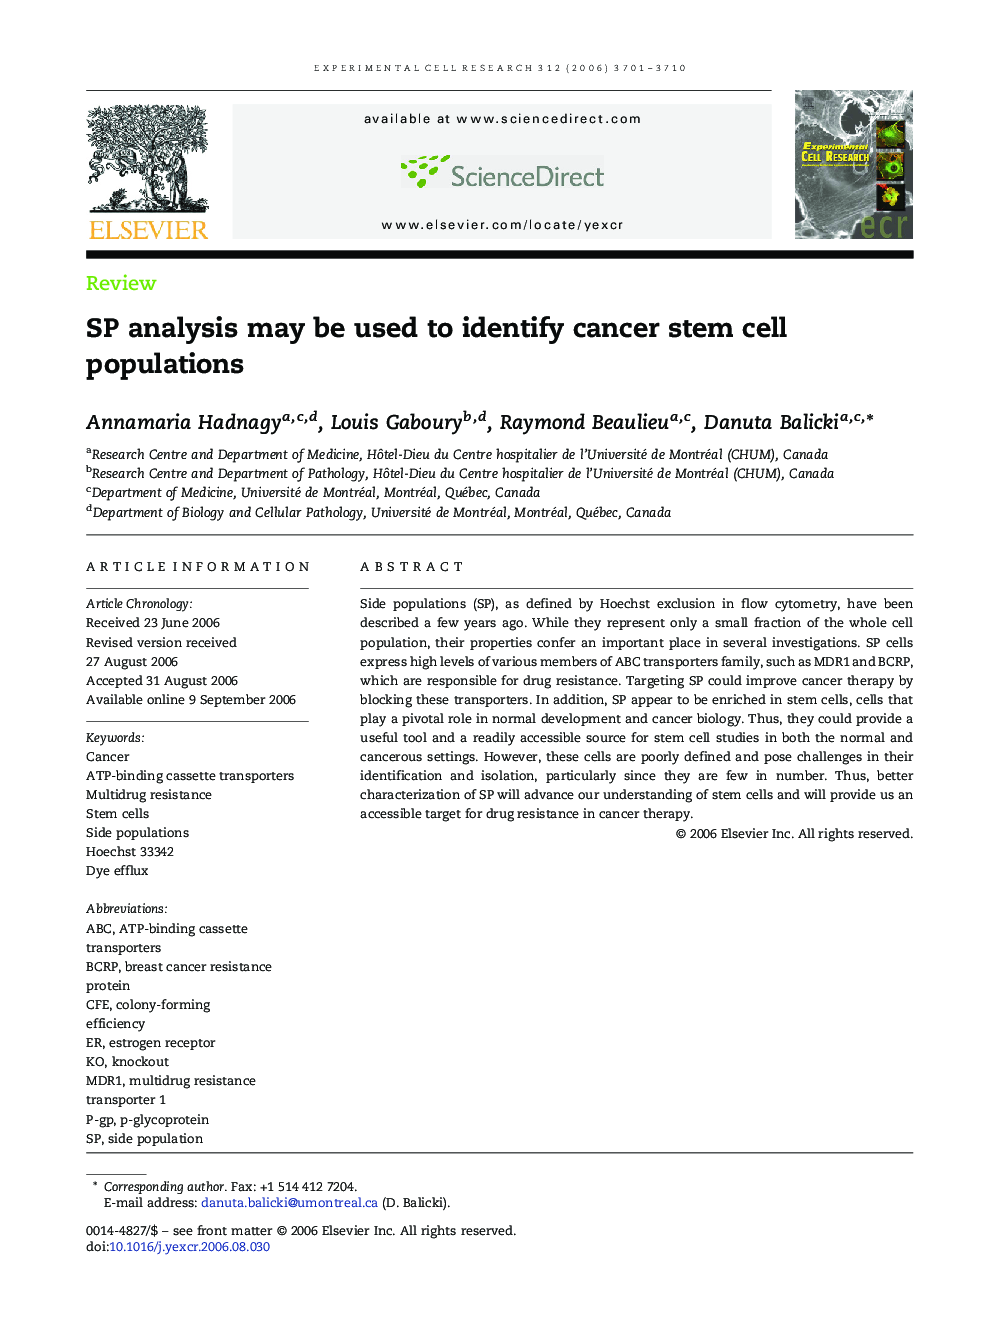 SP analysis may be used to identify cancer stem cell populations